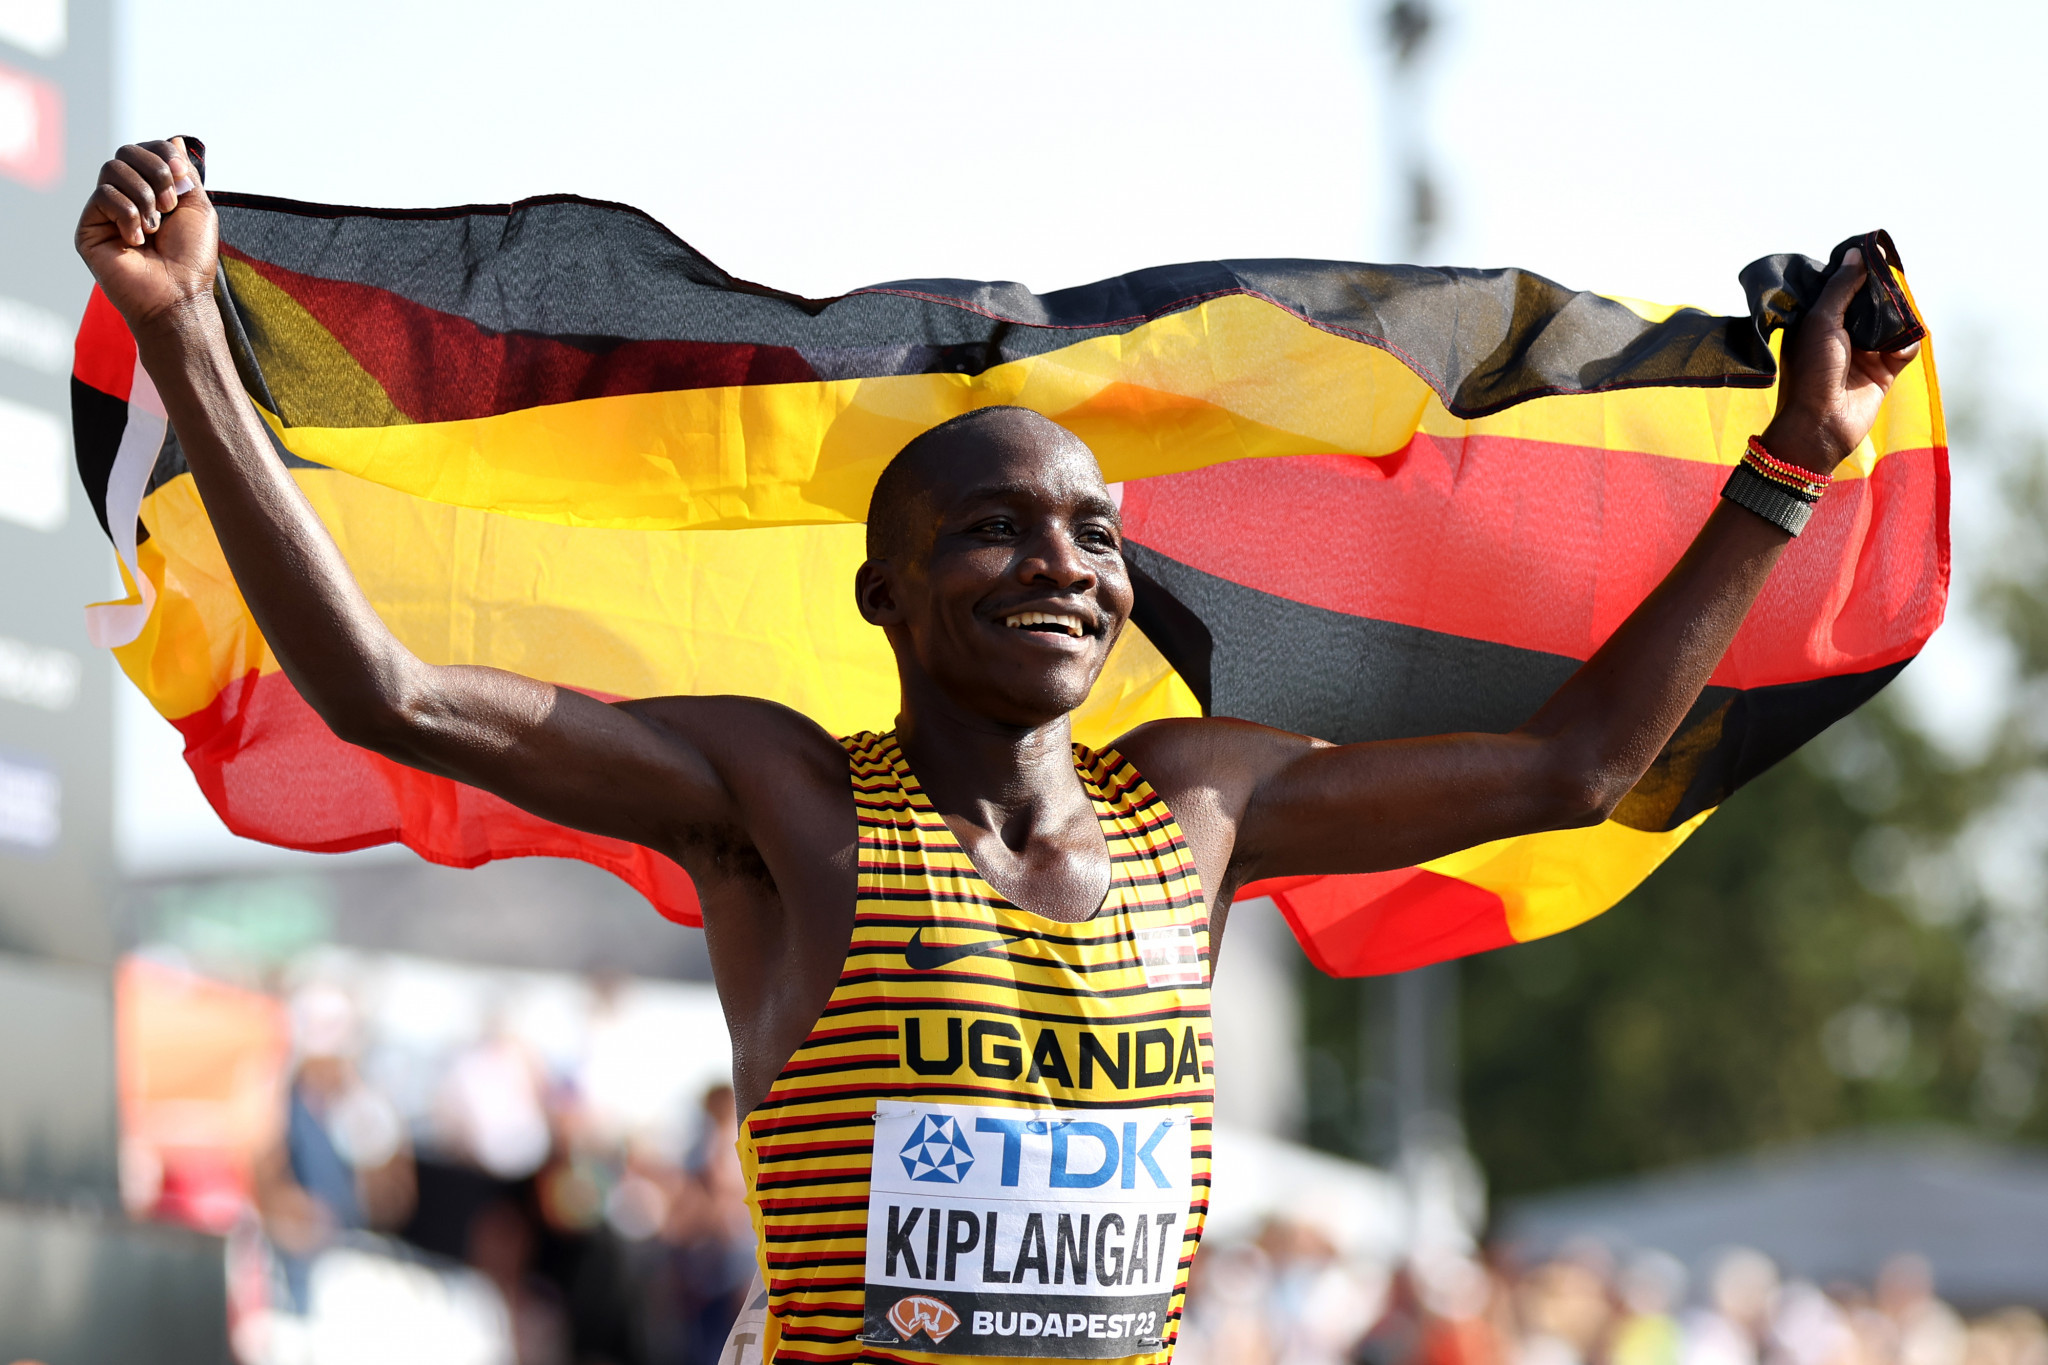 Victor Kiplangat celebrates after winning the men's marathon at the World Athletics Championships in Budapest ©Getty Images